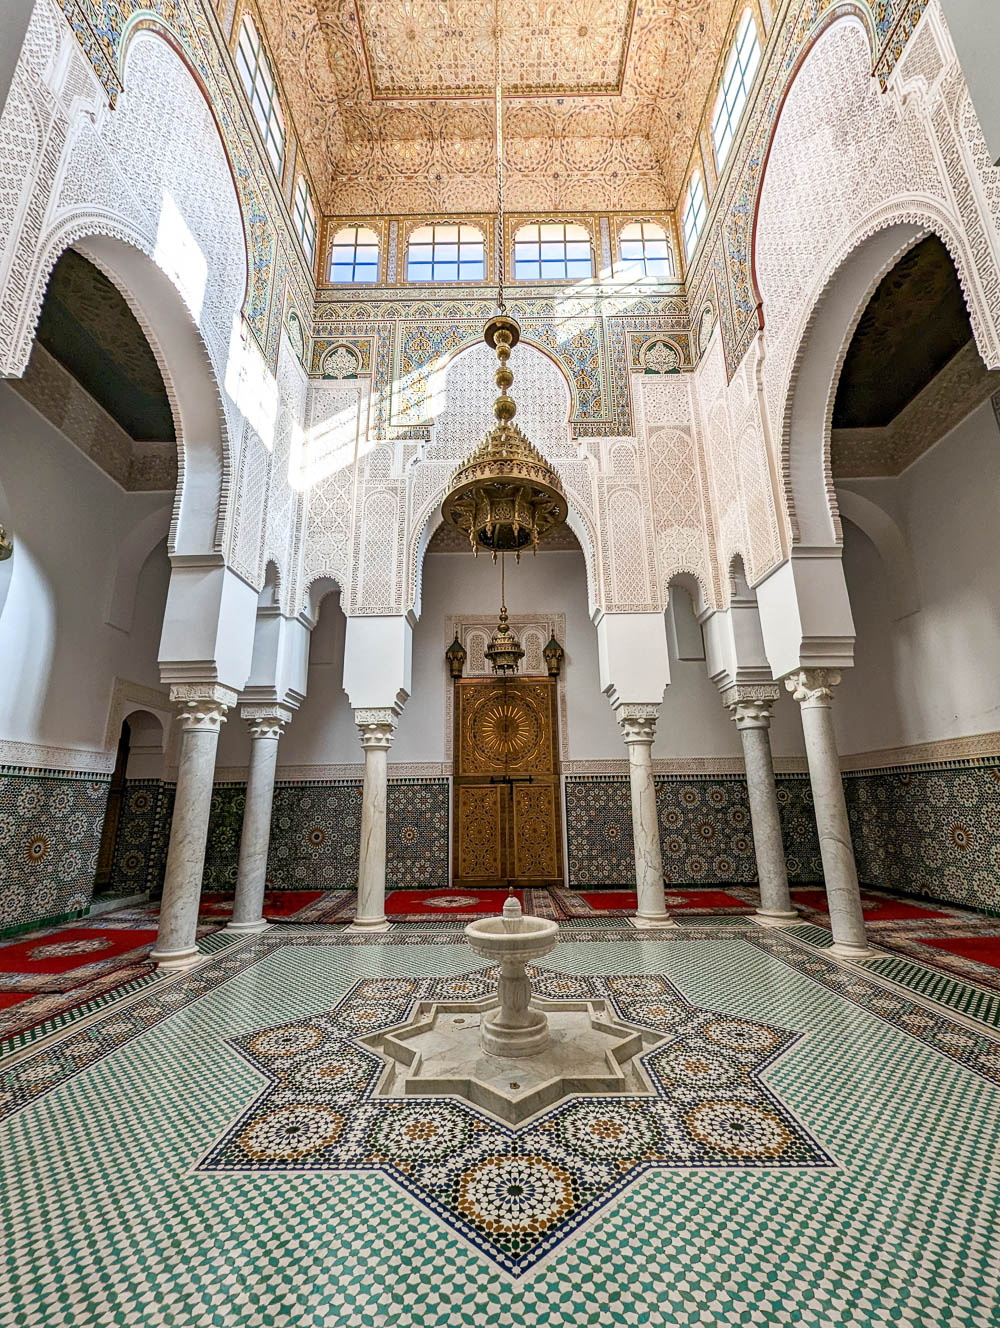 intricately decorated room of mosaics, wood carvings, windows, and a fountain in the middle